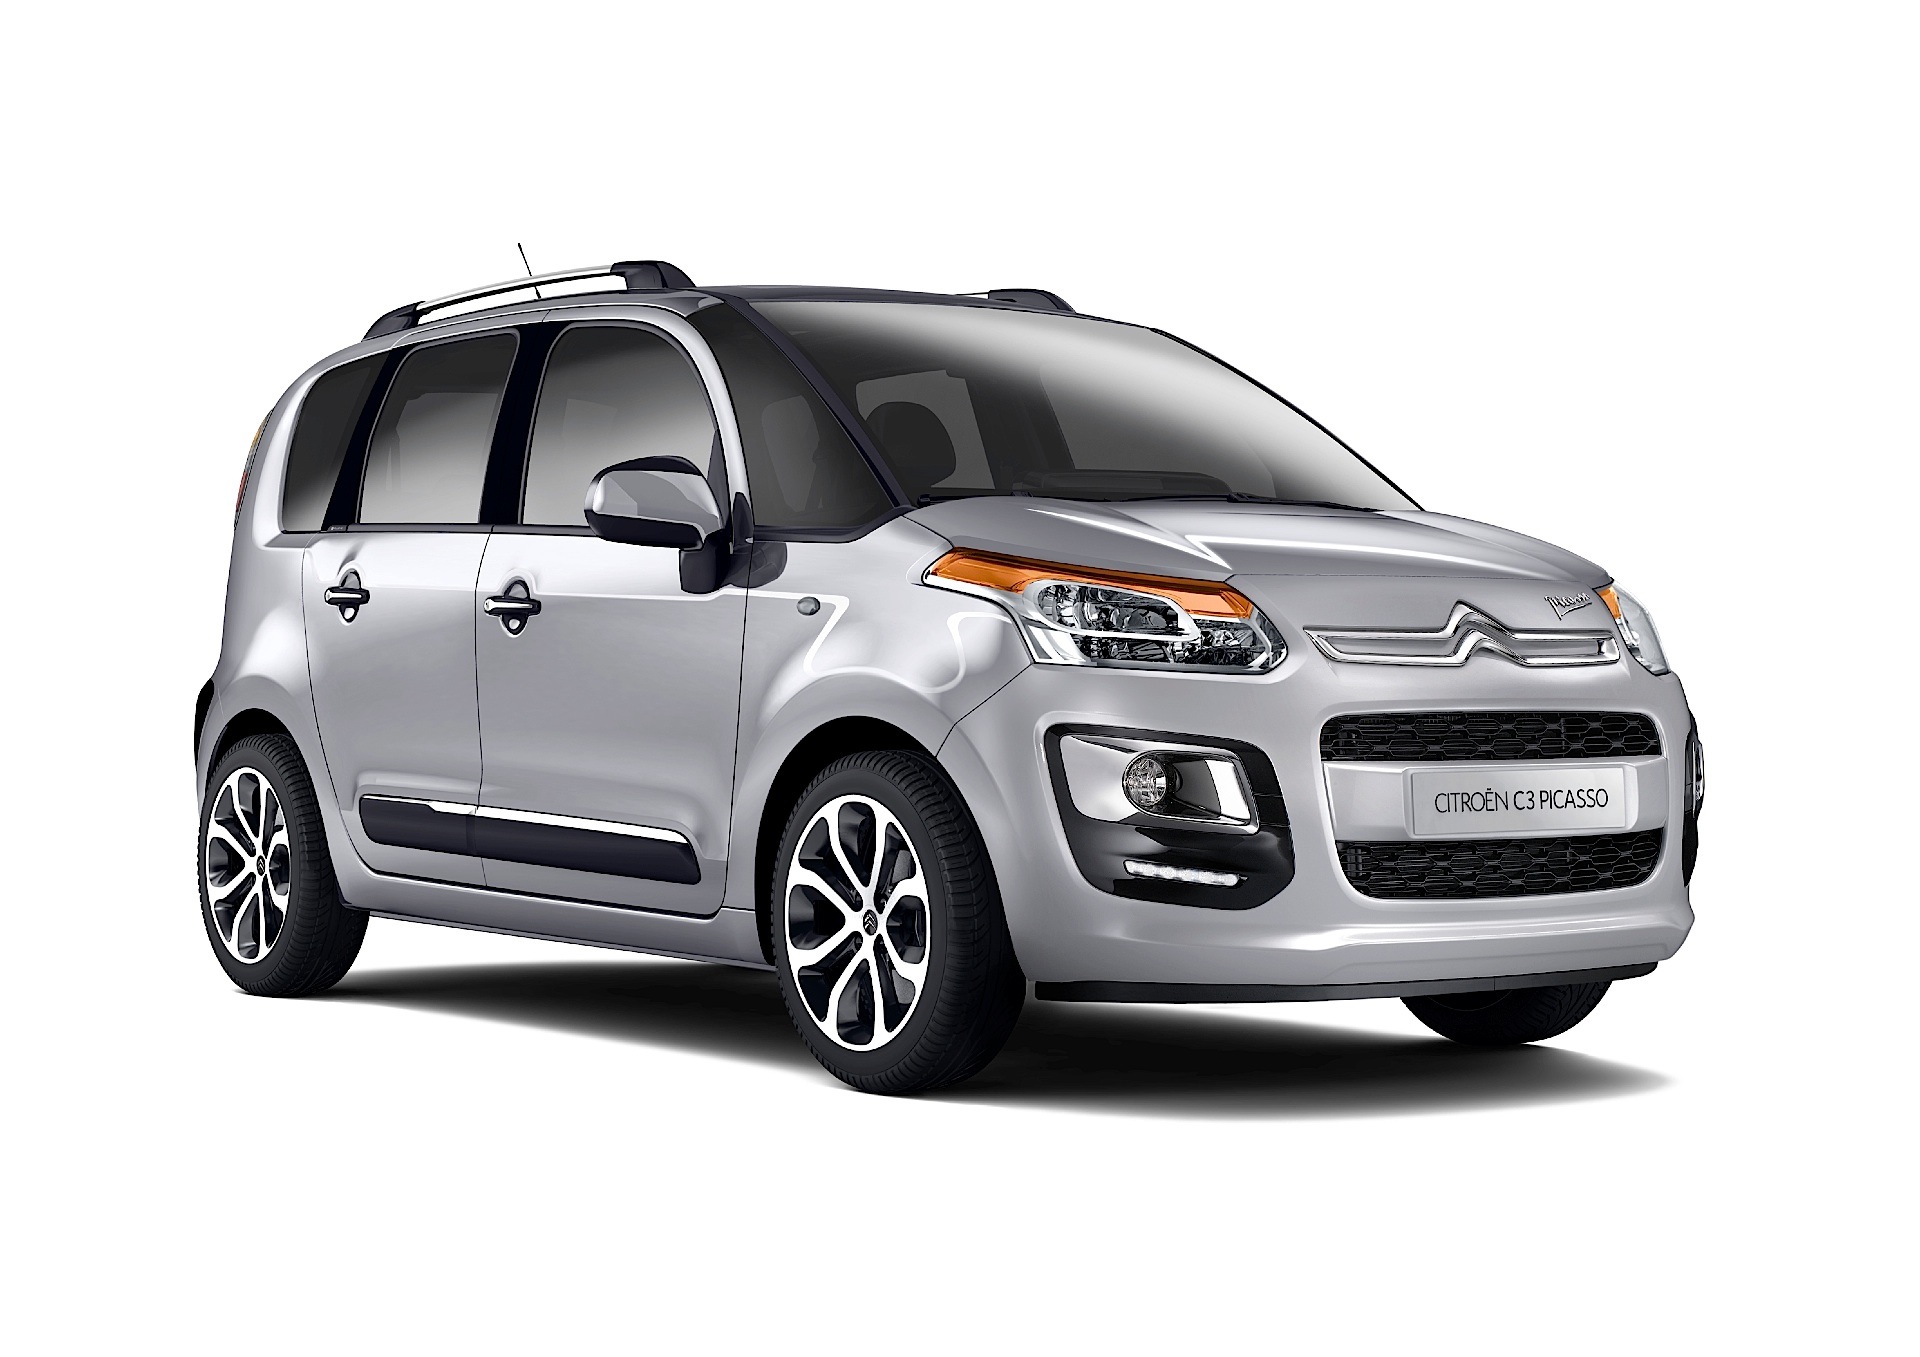 High Quality Tuning Files Citroën C3 Picassso   115hp